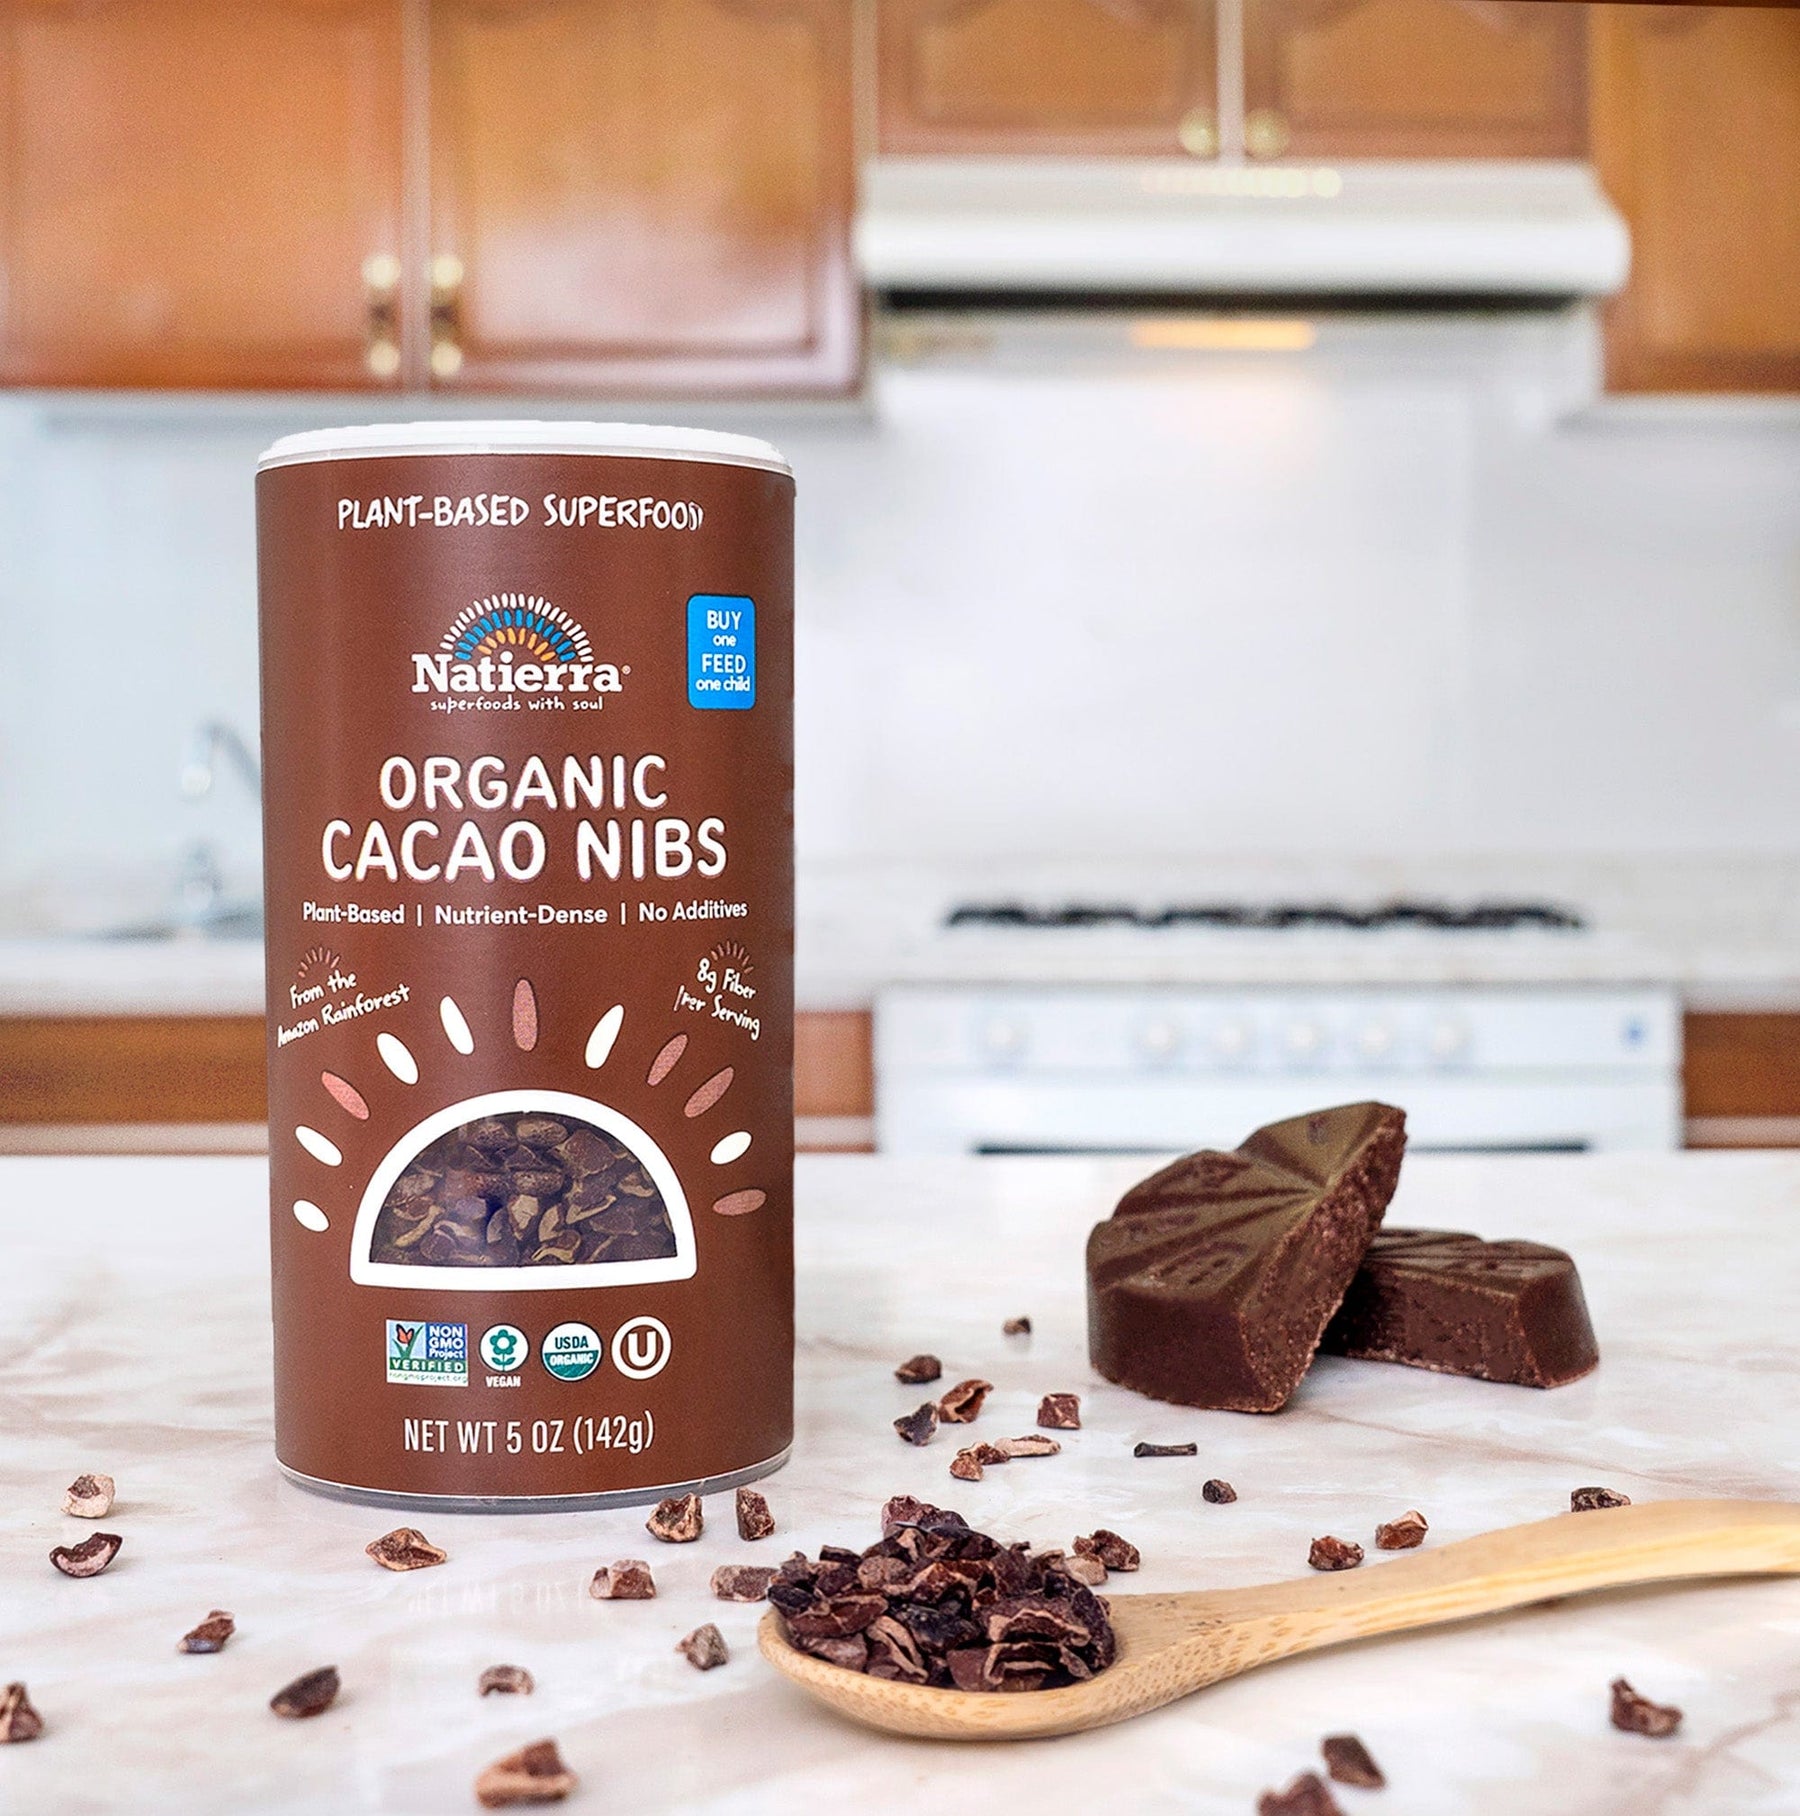 Natierra Organic Cacao Nibs shaker on a kitchen counter 